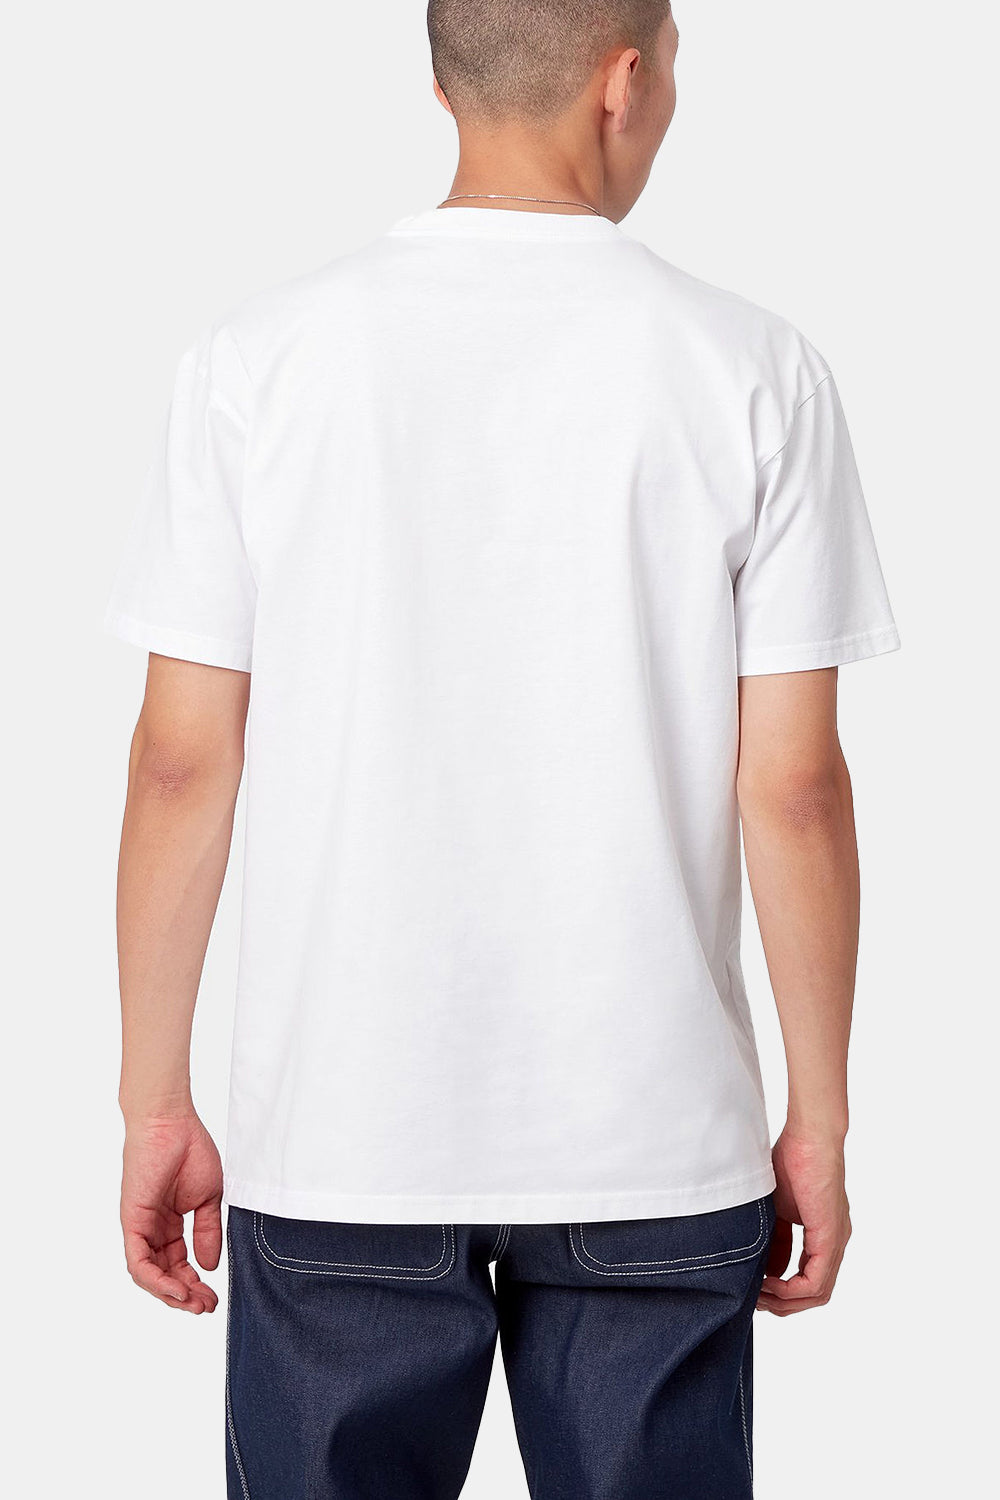 Carhartt WIP Short Sleeve Chase T-Shirt (White/Gold) | Number Six